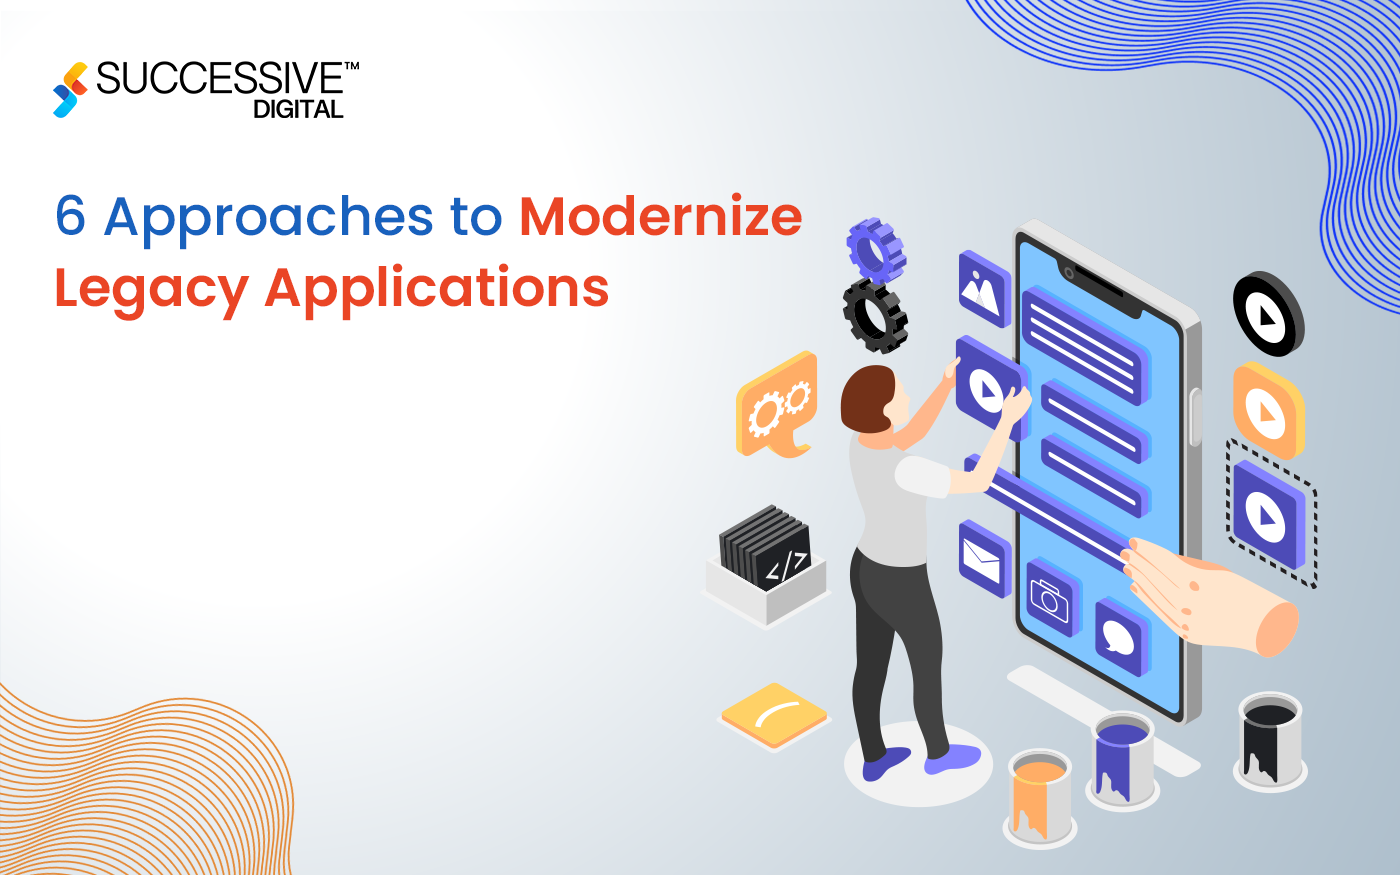 6 Approaches to Modernize Legacy Applications